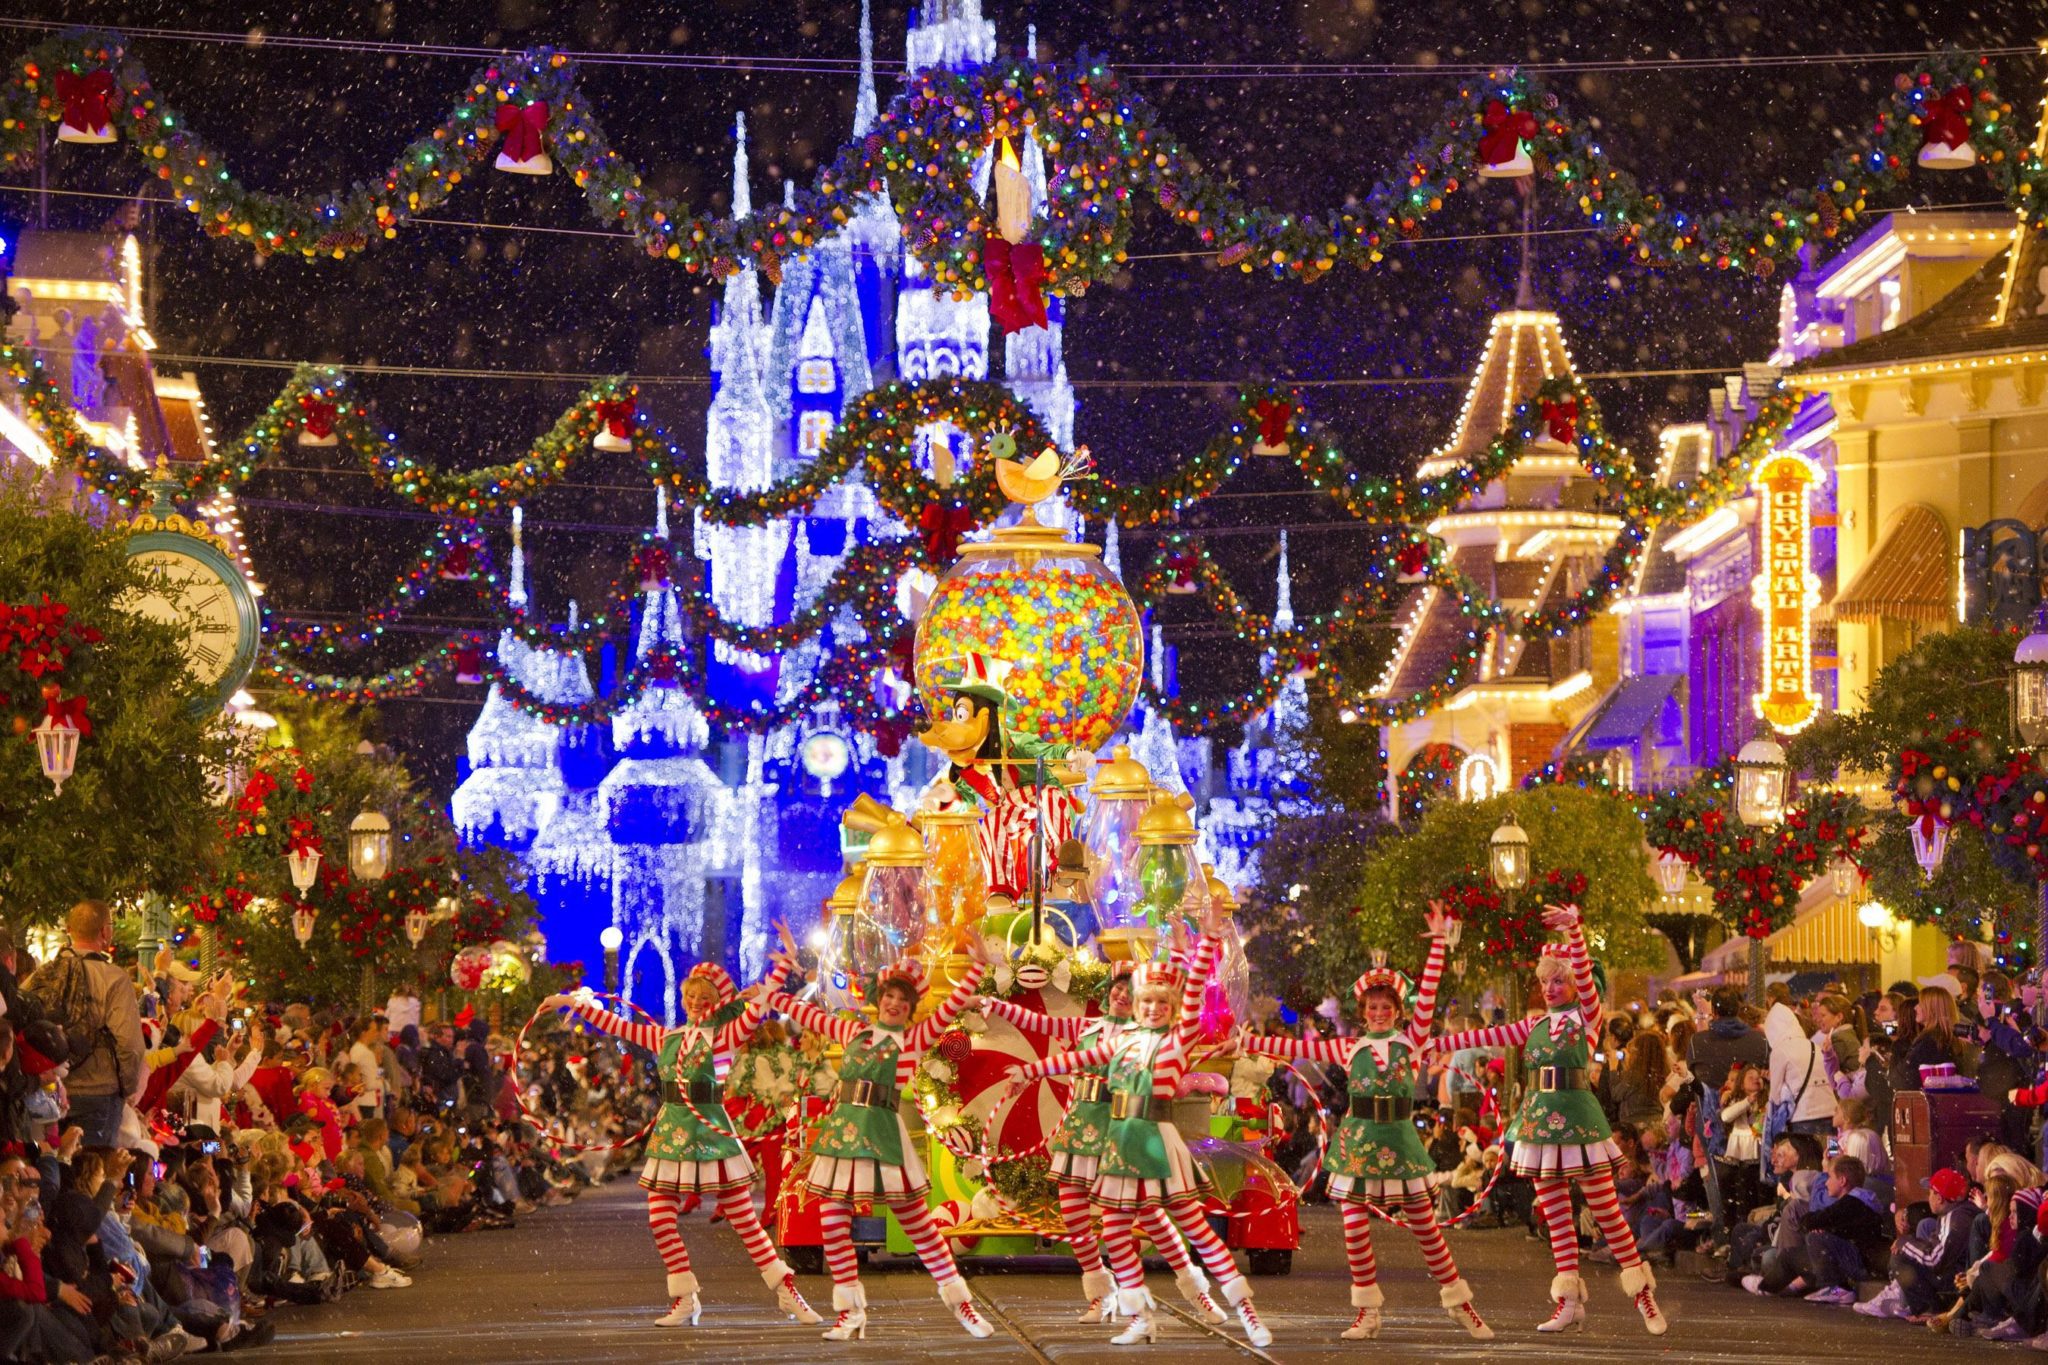 The Best Theme Park Christmas Events for 2013